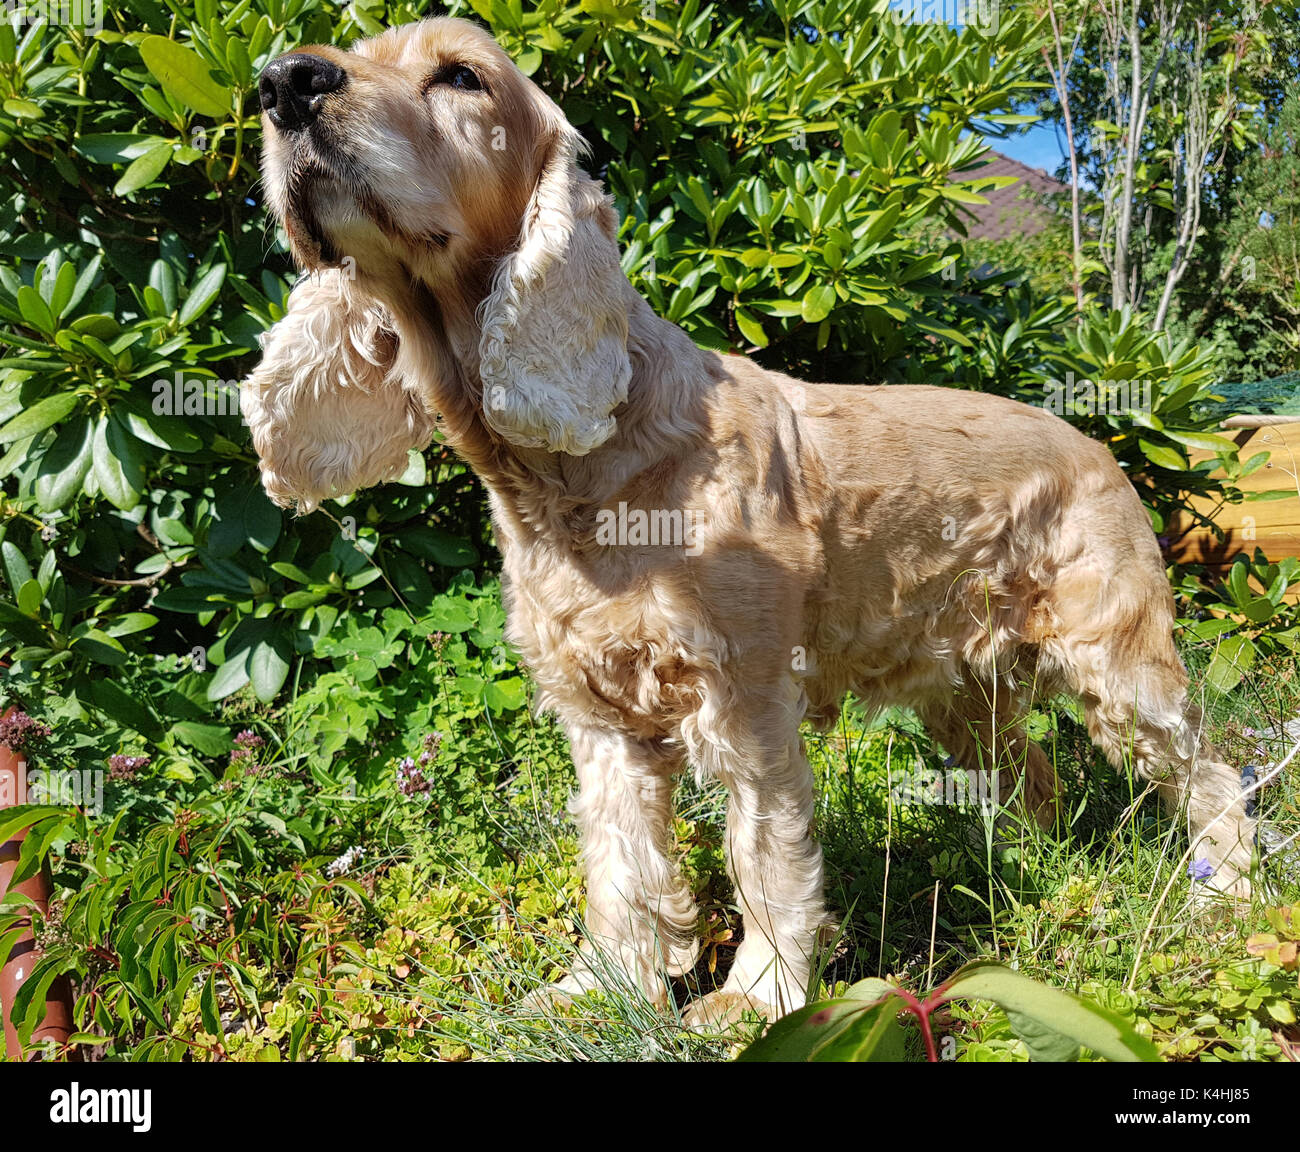 Haushund High Resolution Stock Photography and Images - Alamy